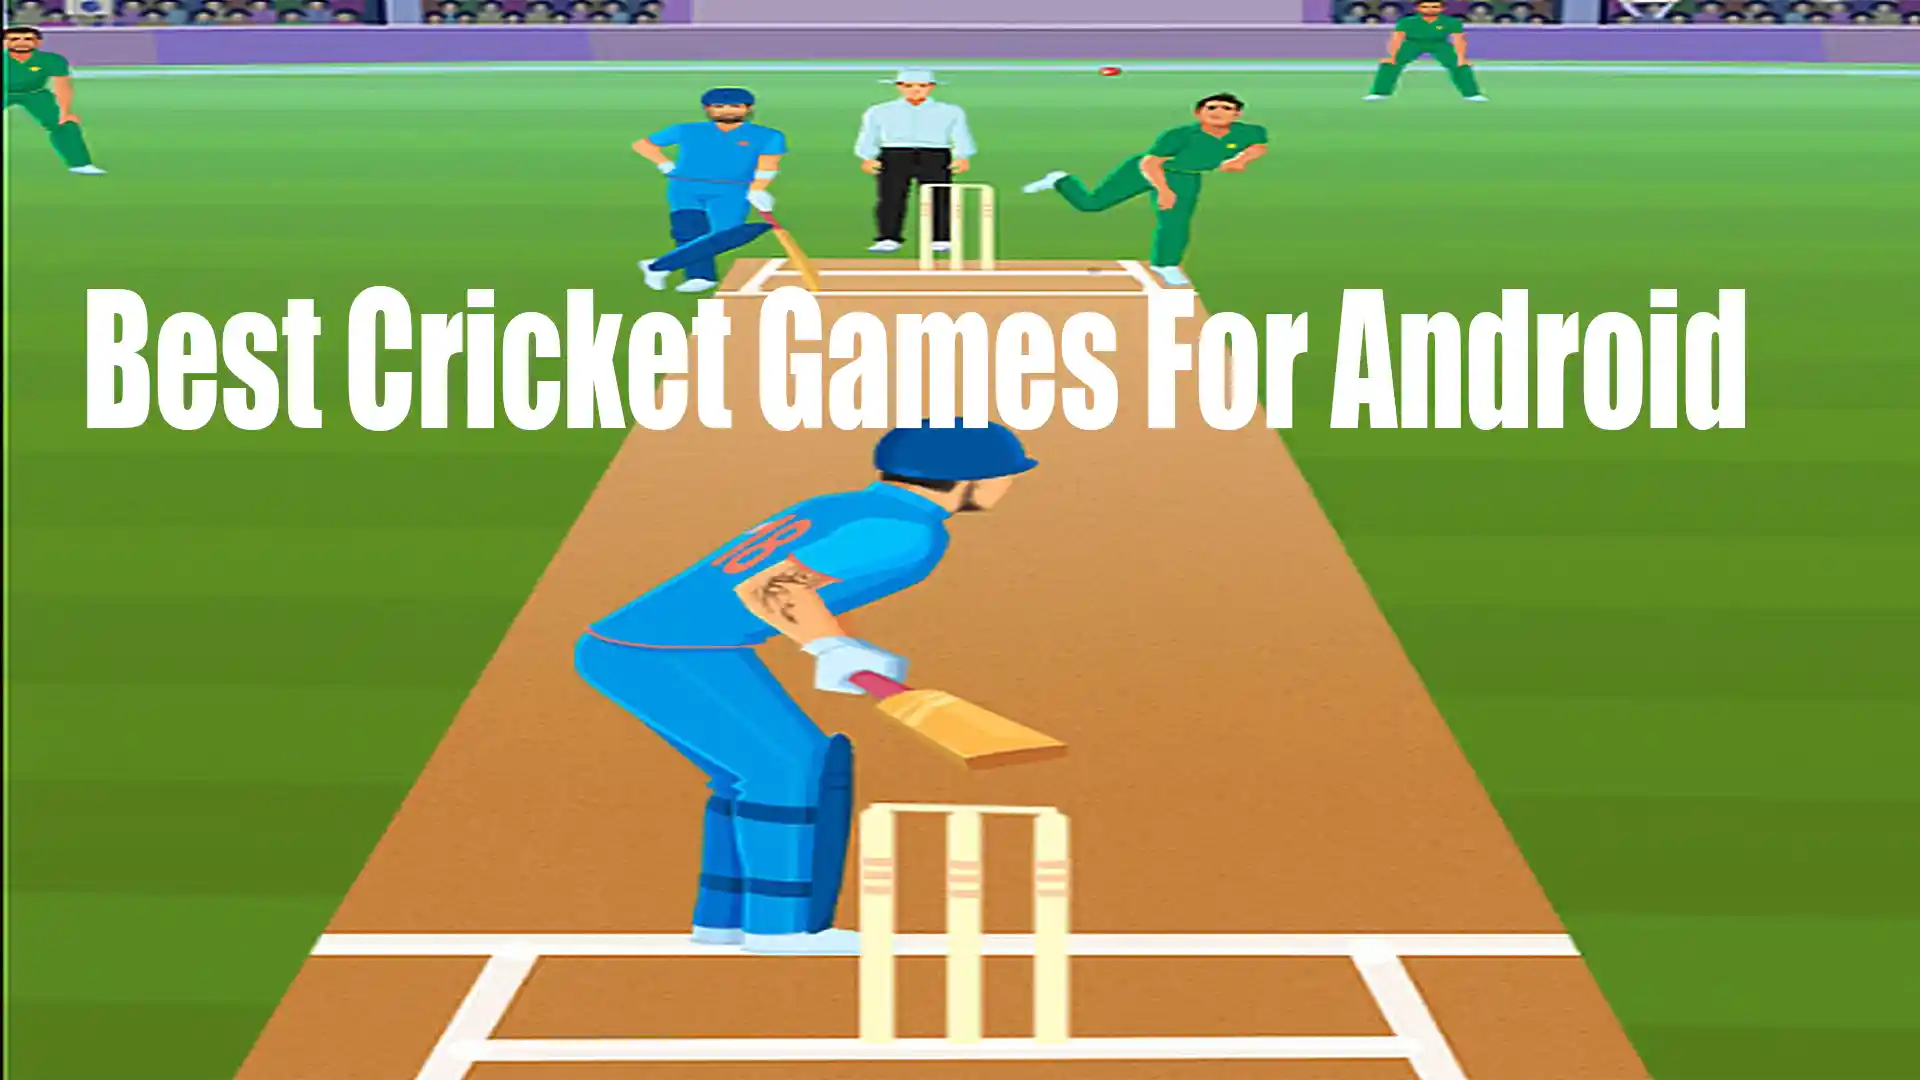 15 Best Cricket Games For Android 2022 - Reviewed & Rated